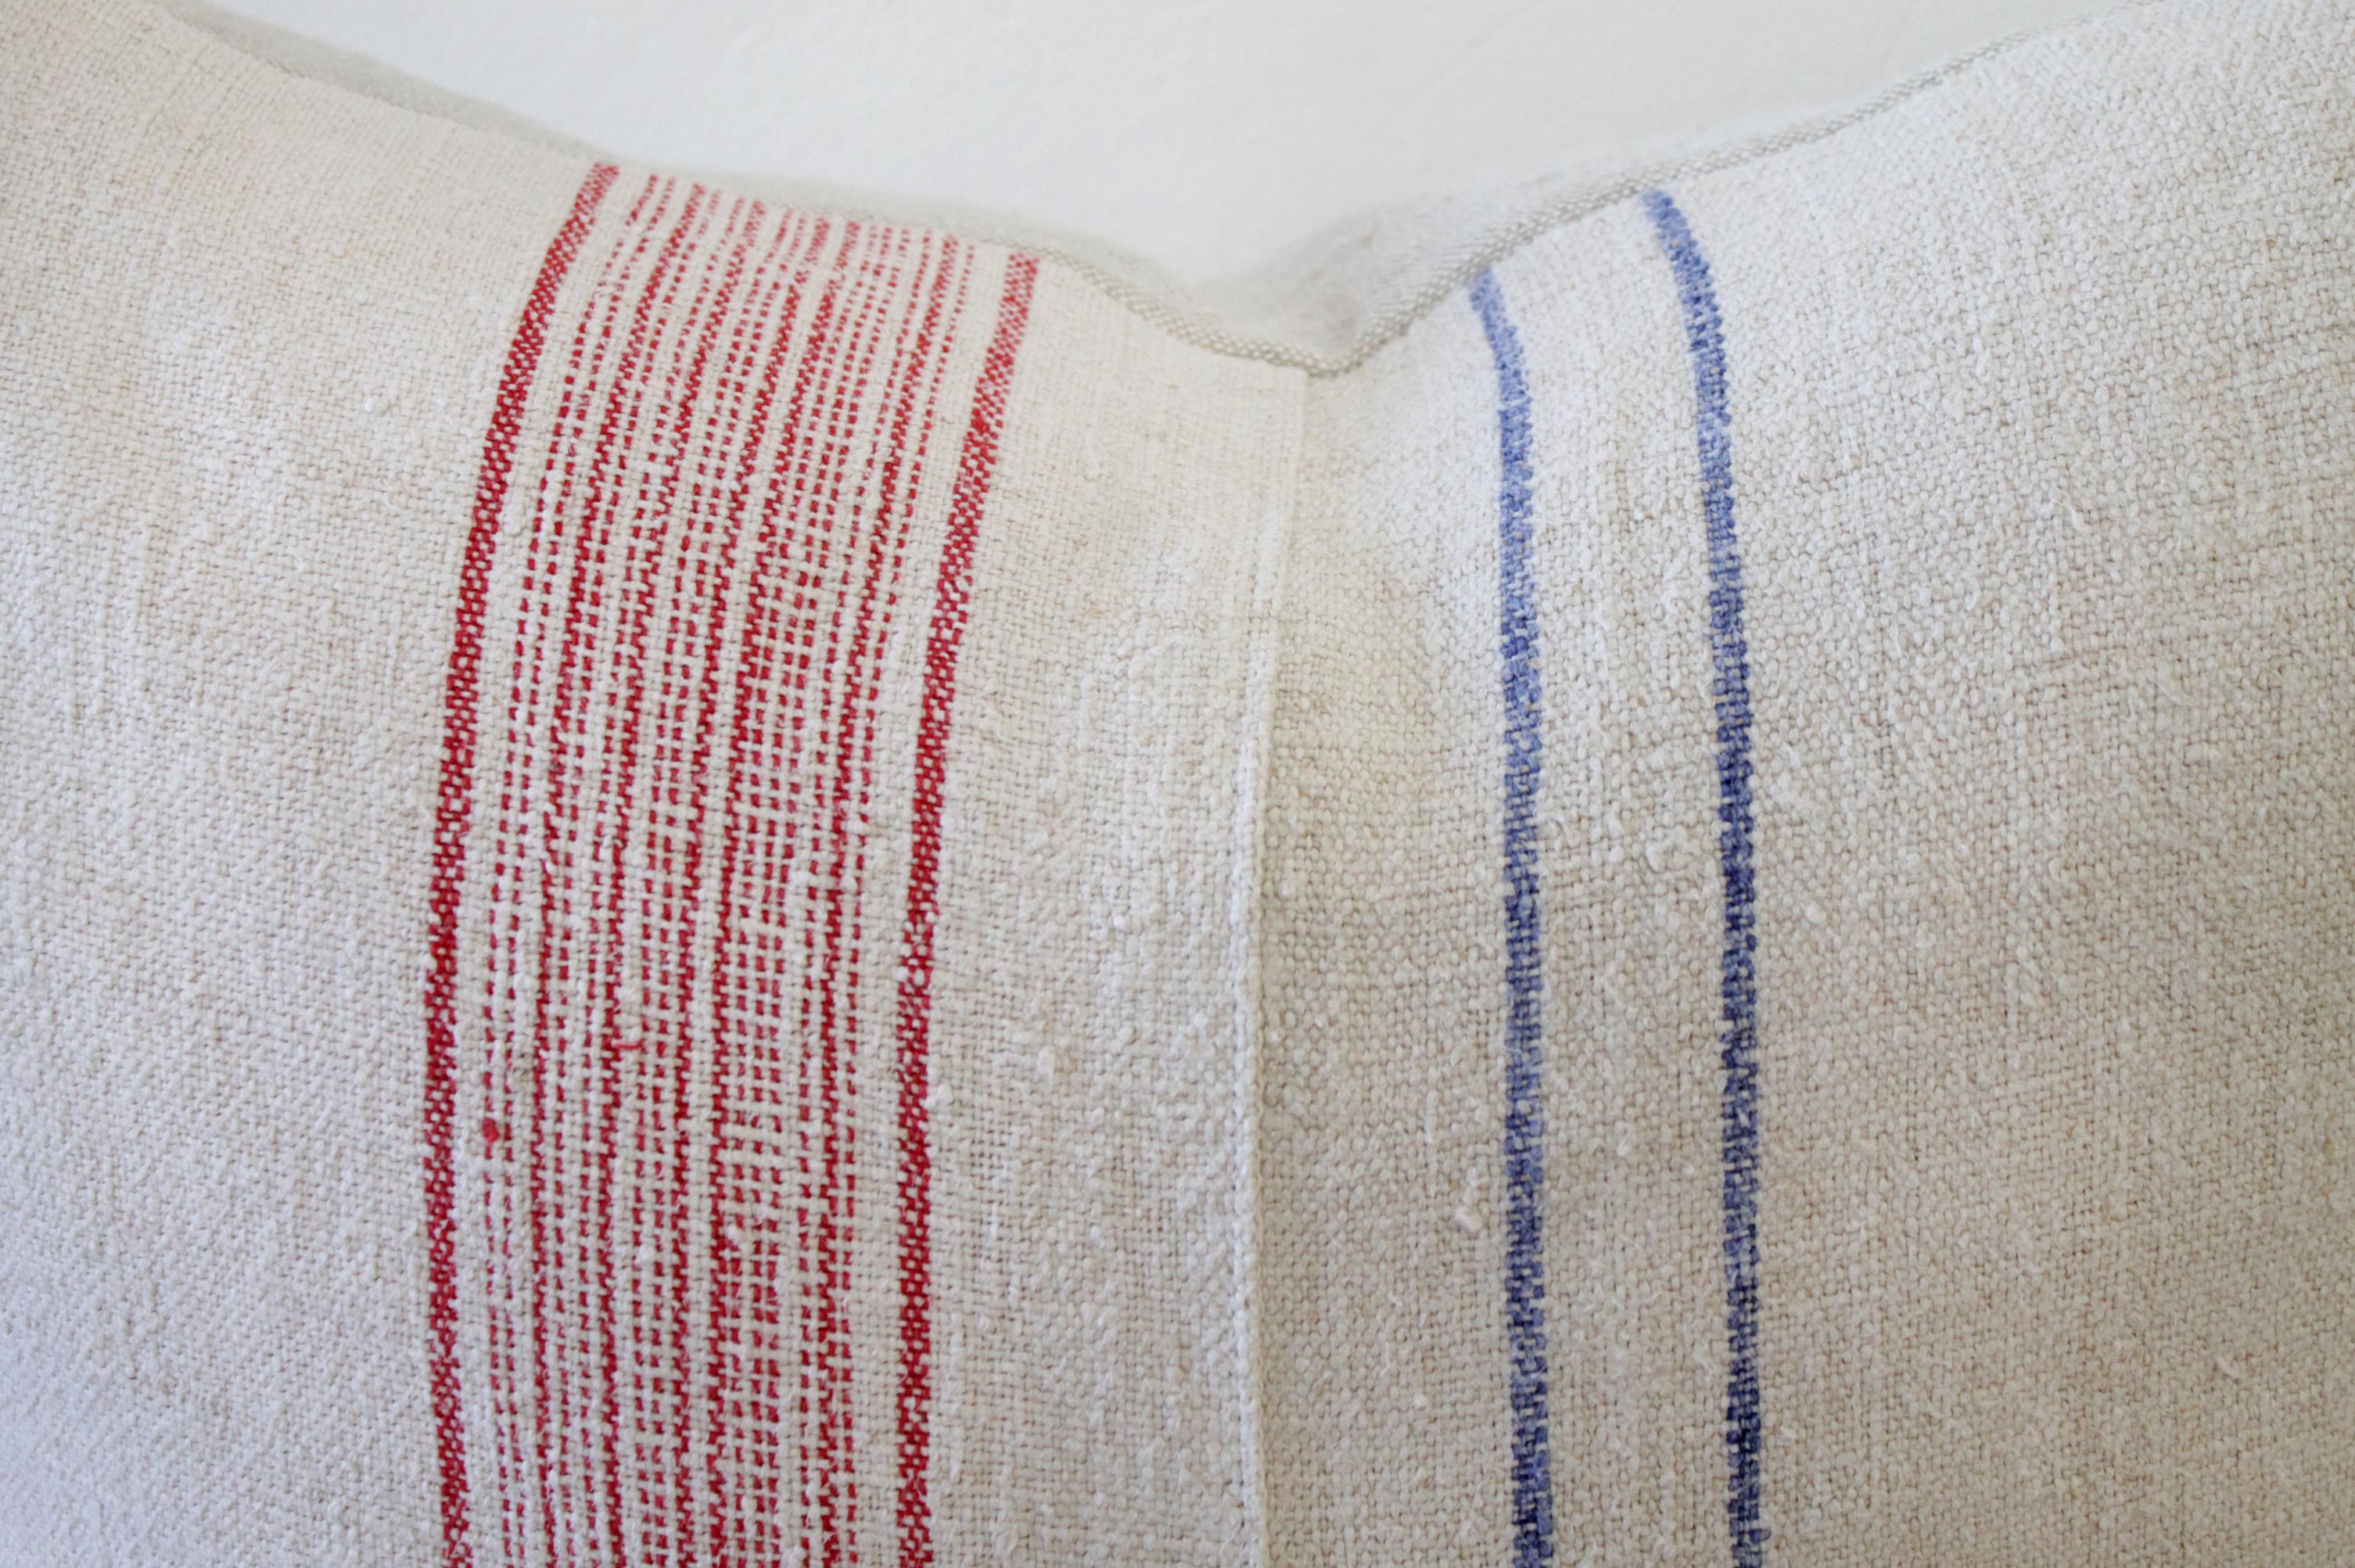 Vintage European grain sack pillows, custom made with a patchwork design. Oatmeal colored background, with red/blue stripes, and hidden zipper closure. Some grain sacks have original patchwork, and stitching. Please see photos. Insert not included,